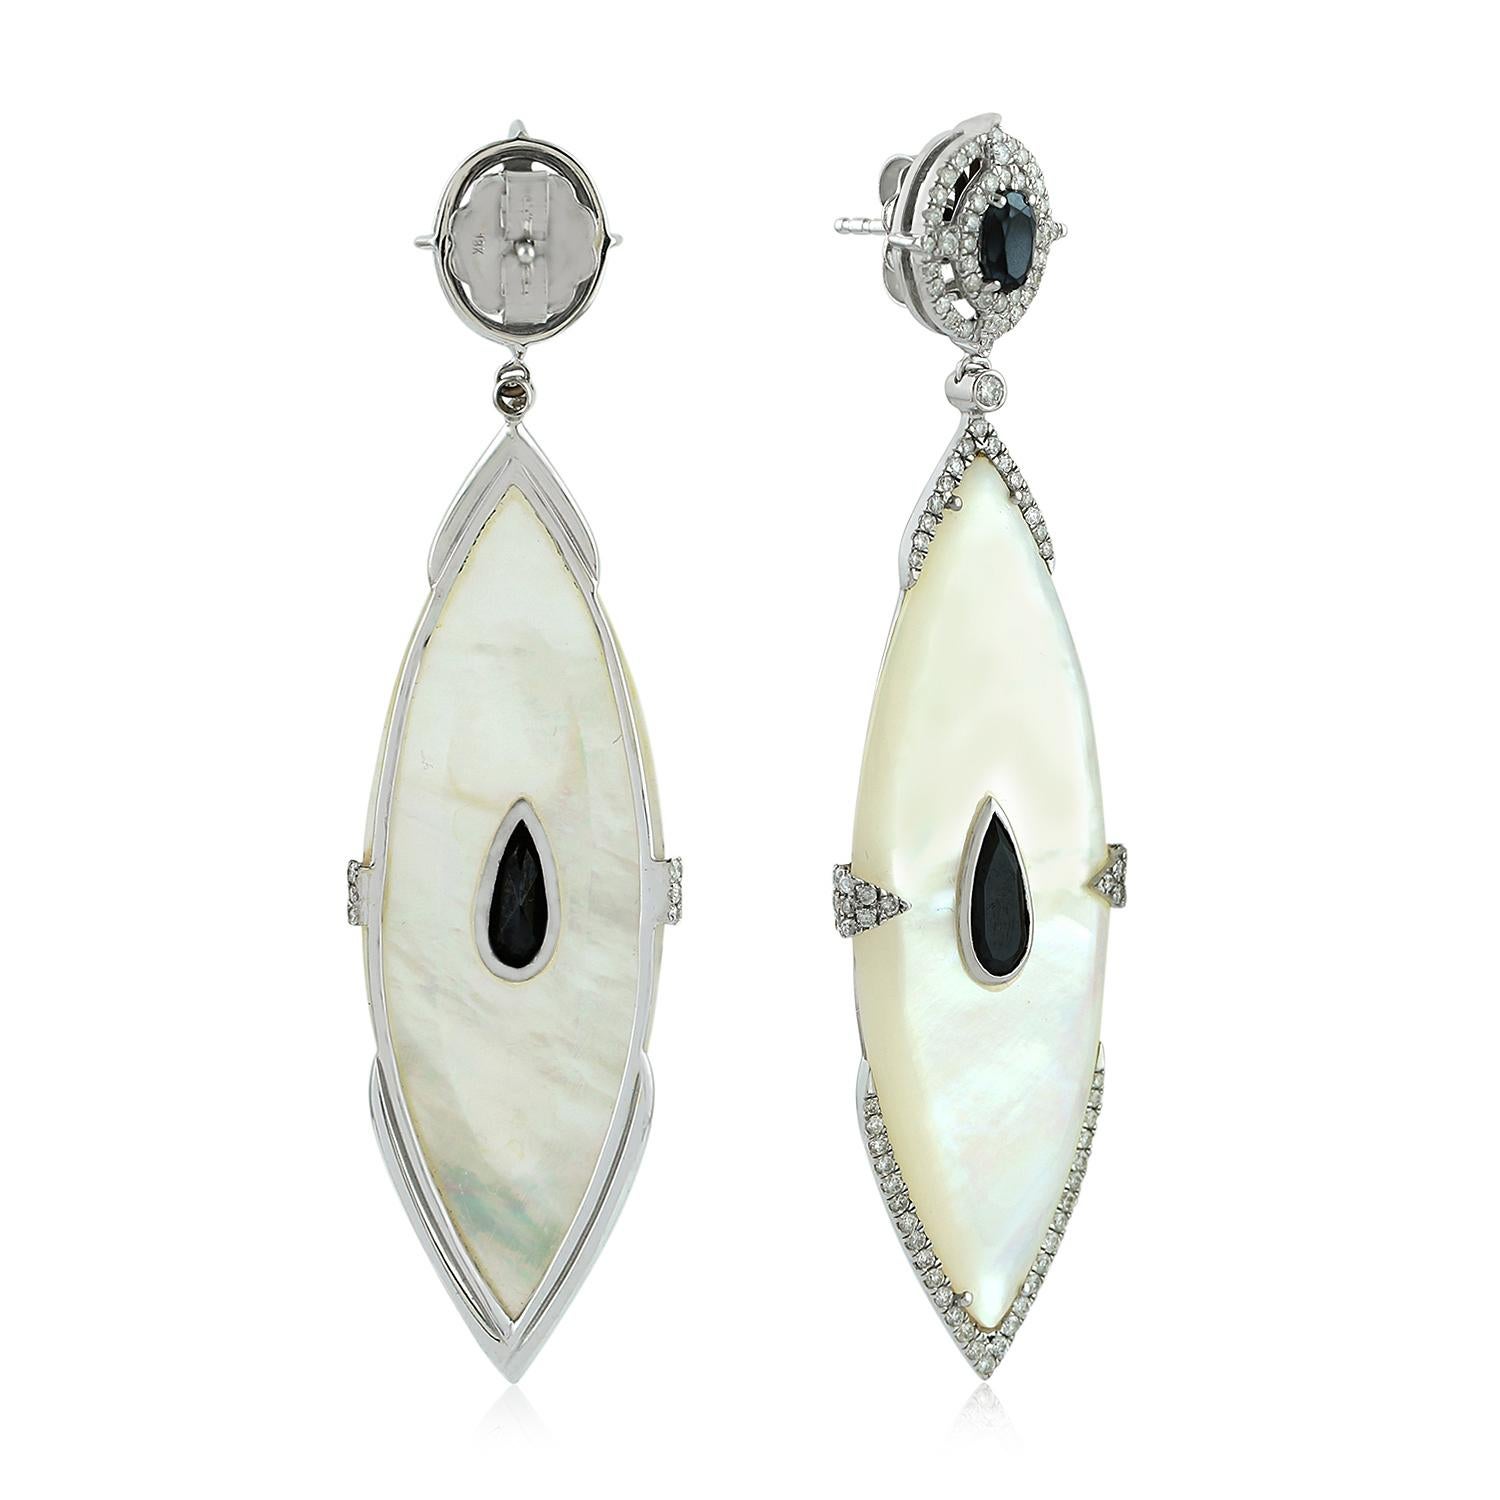 Chic and pretty this Marquee shape Mother Of Pearl Earring with Spinel and Diamonds is set in 18K white gold.

Closure: Push Post

18KT: 11.652g
Diamond: 1.50ct
Mother Of Pearl: 22.68ct
SPINEL: 2.96ct